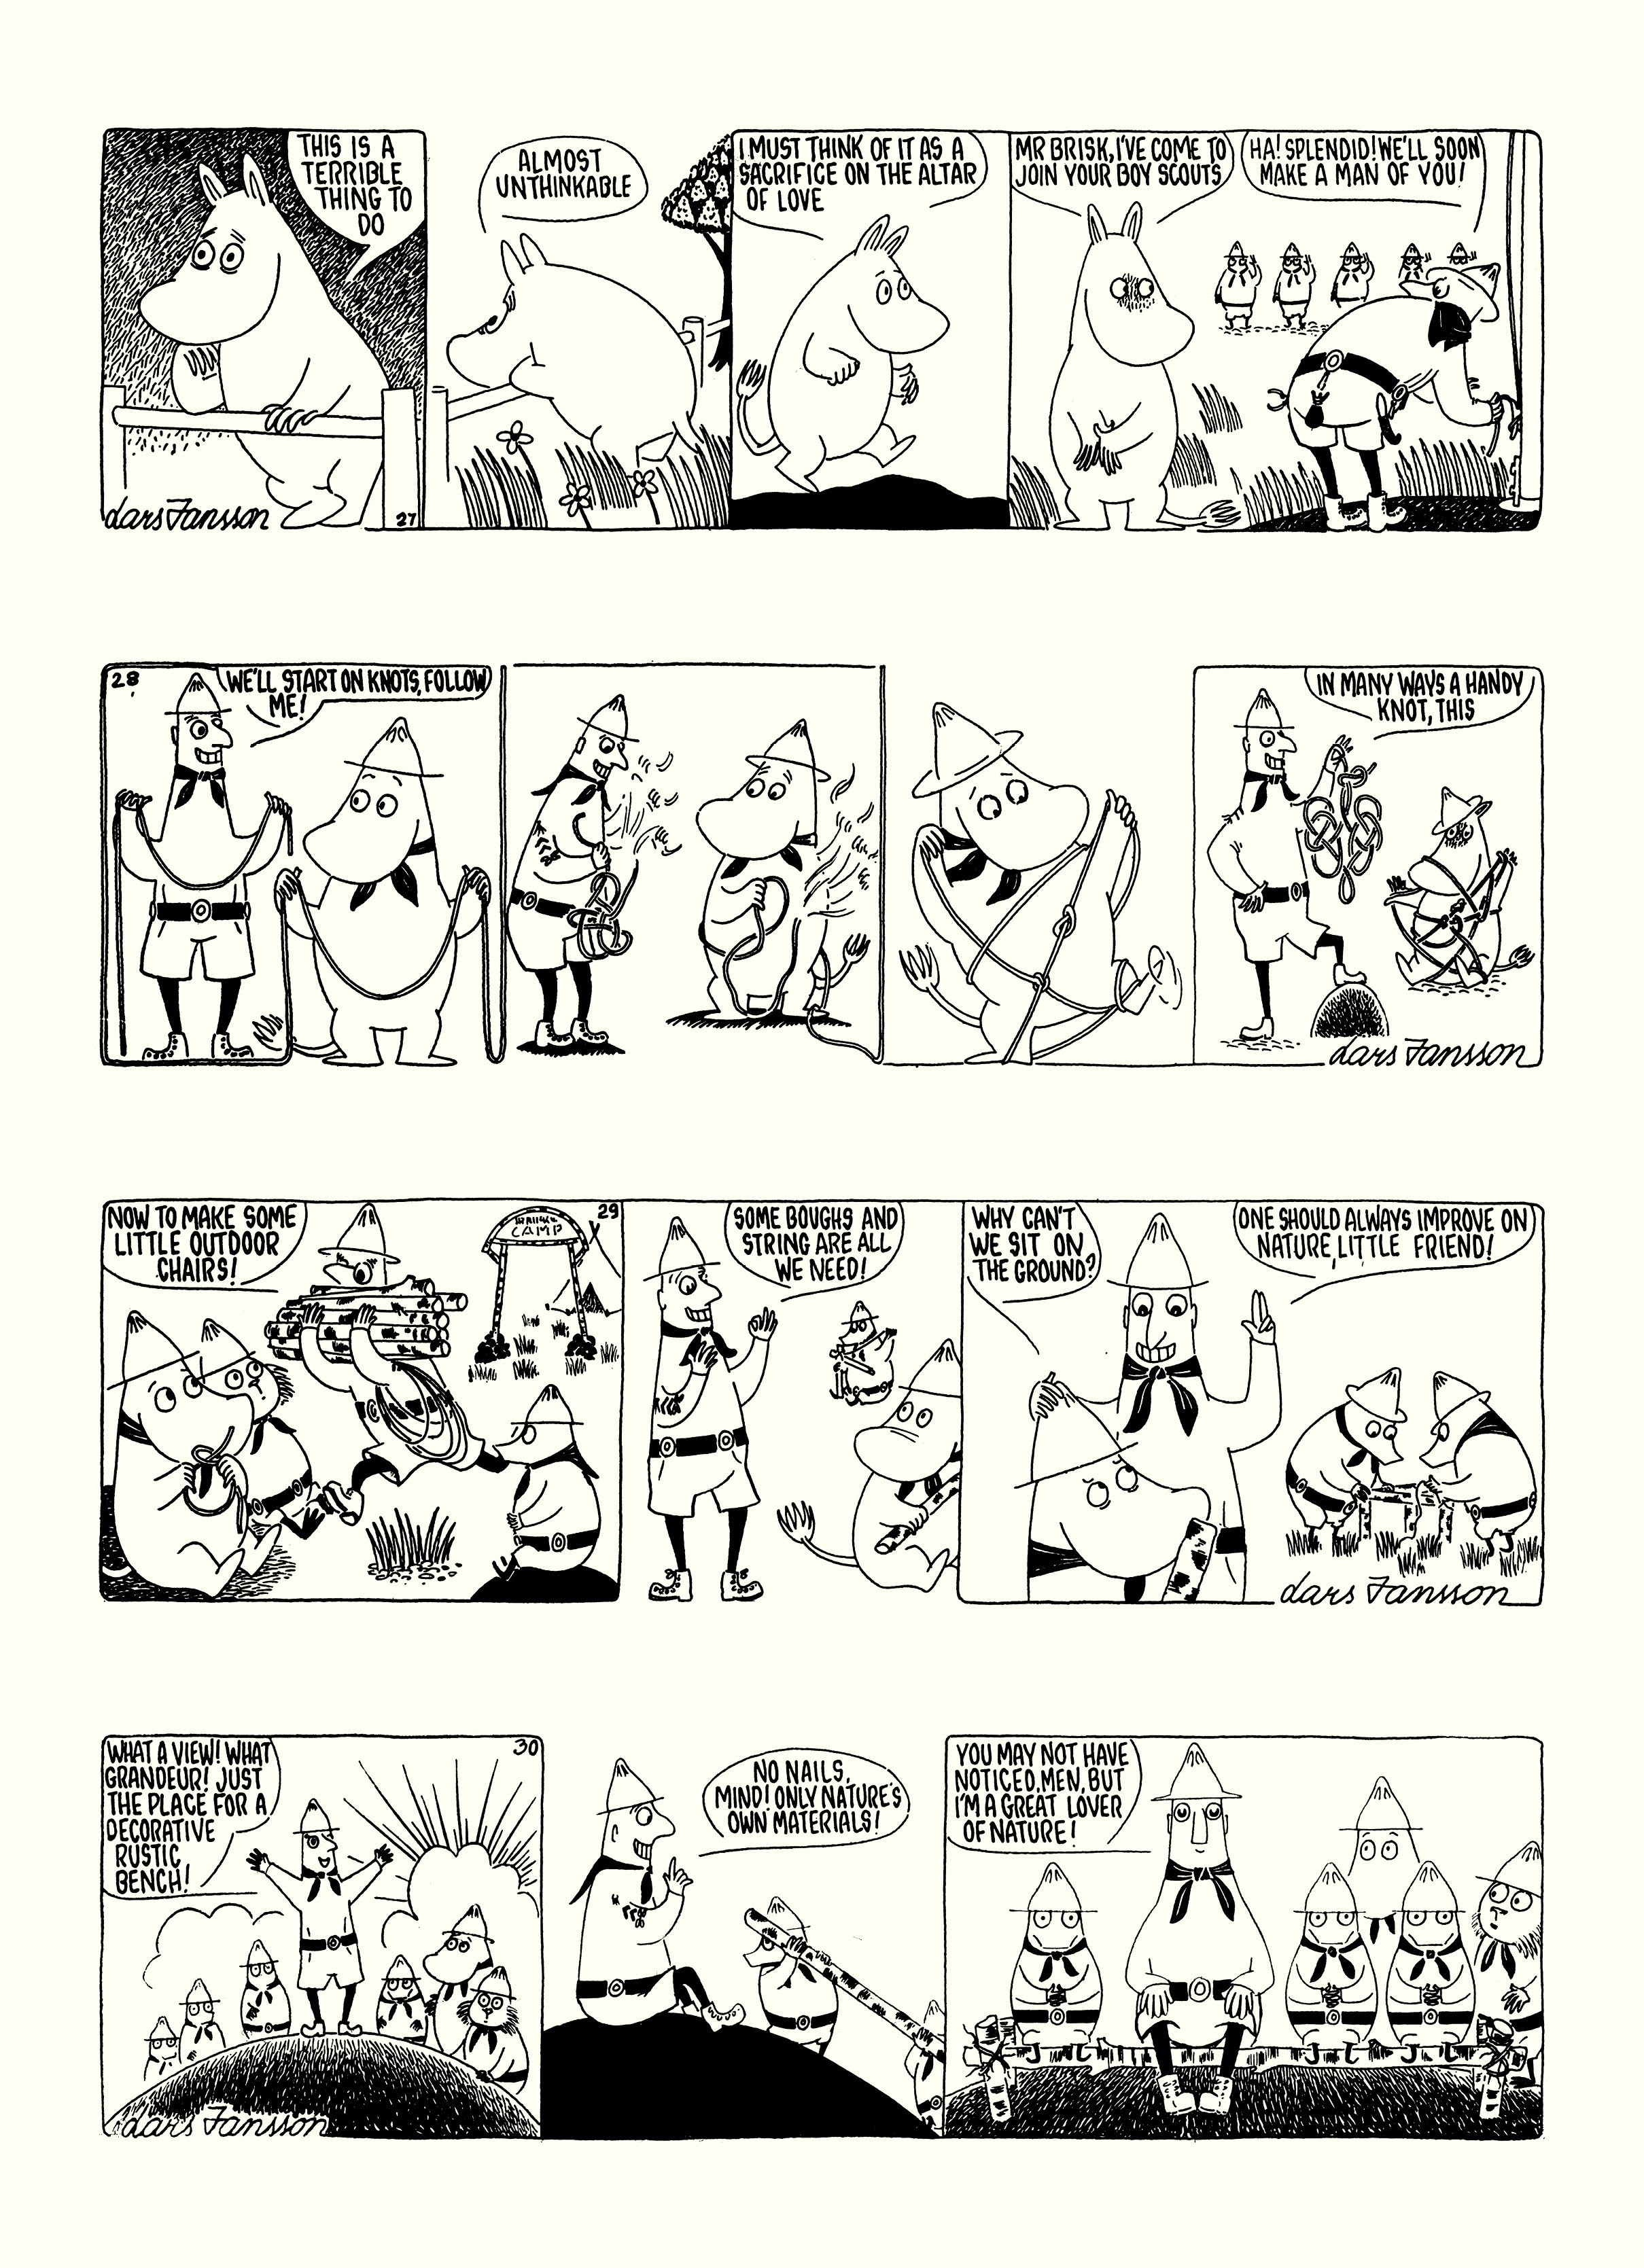 Read online Moomin: The Complete Lars Jansson Comic Strip comic -  Issue # TPB 7 - 34